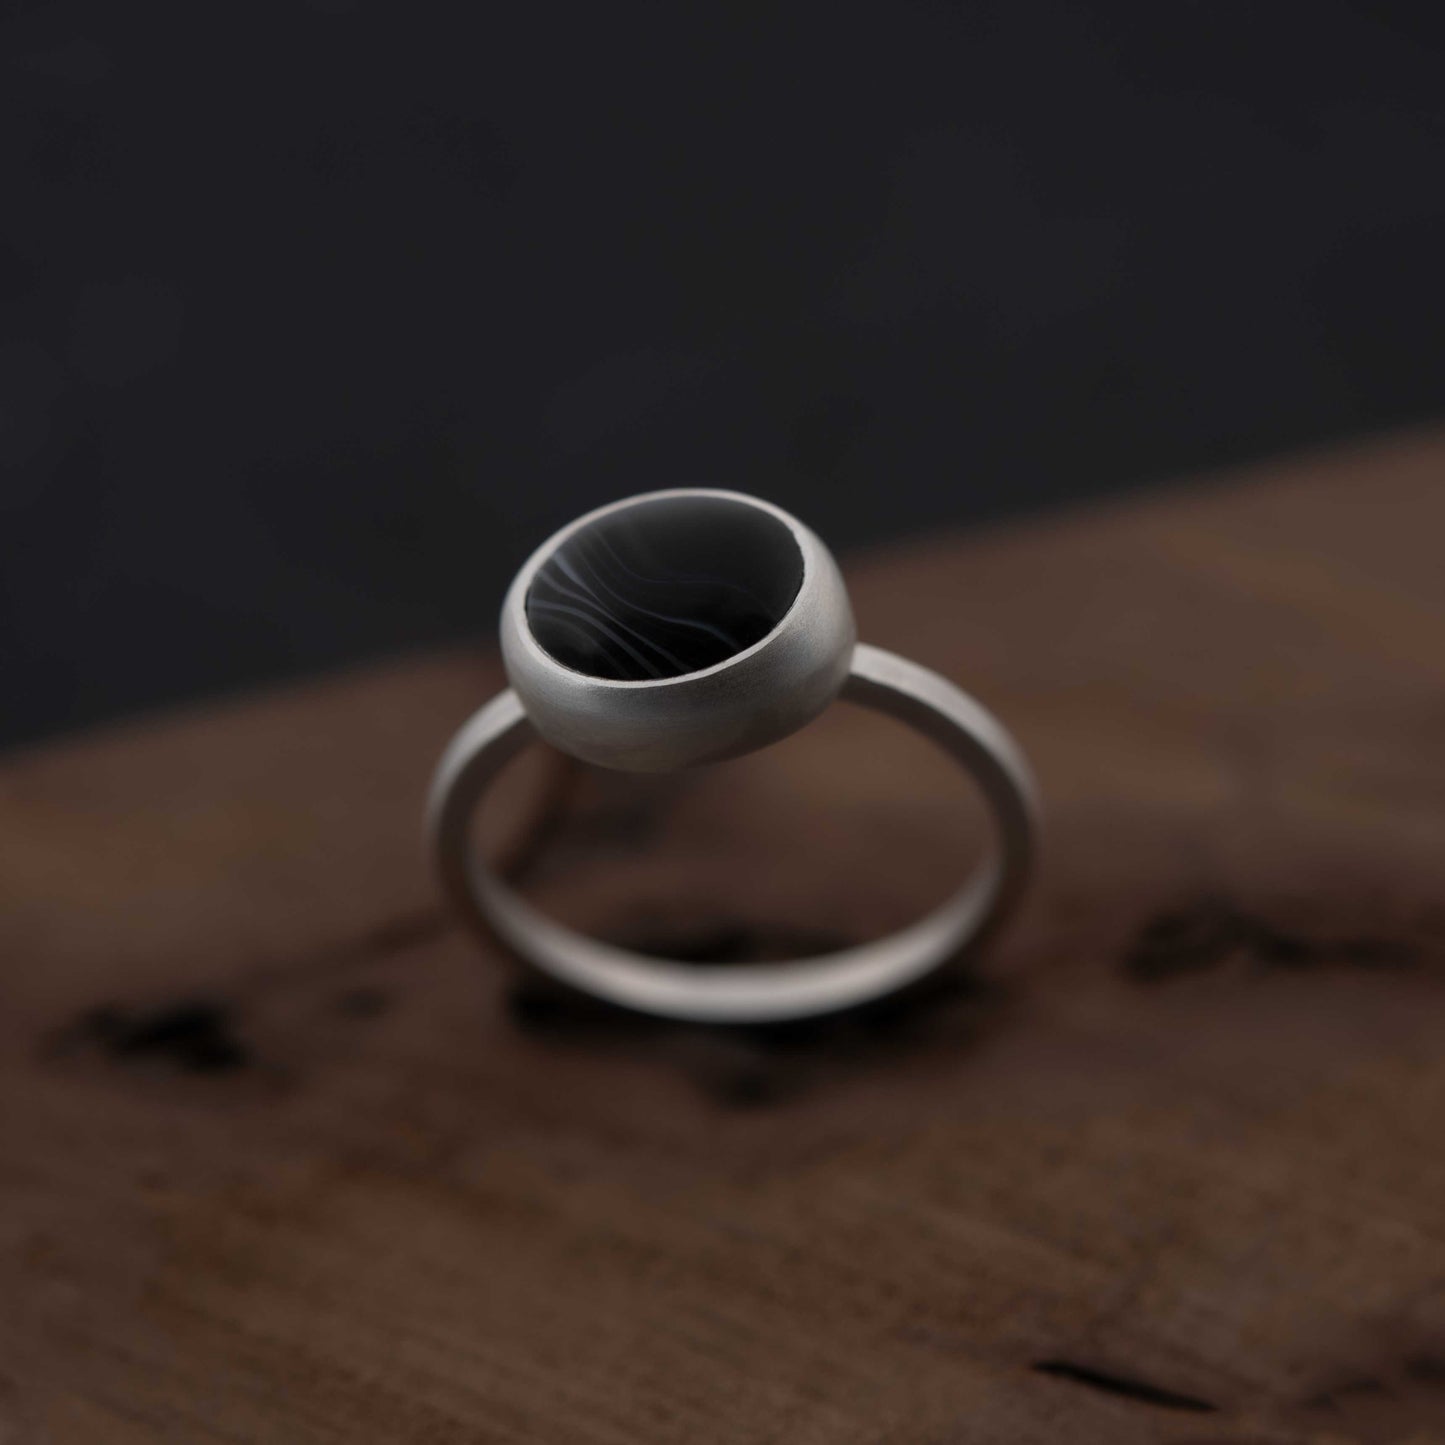 Exquisite silver ring with natural black banded agate stone